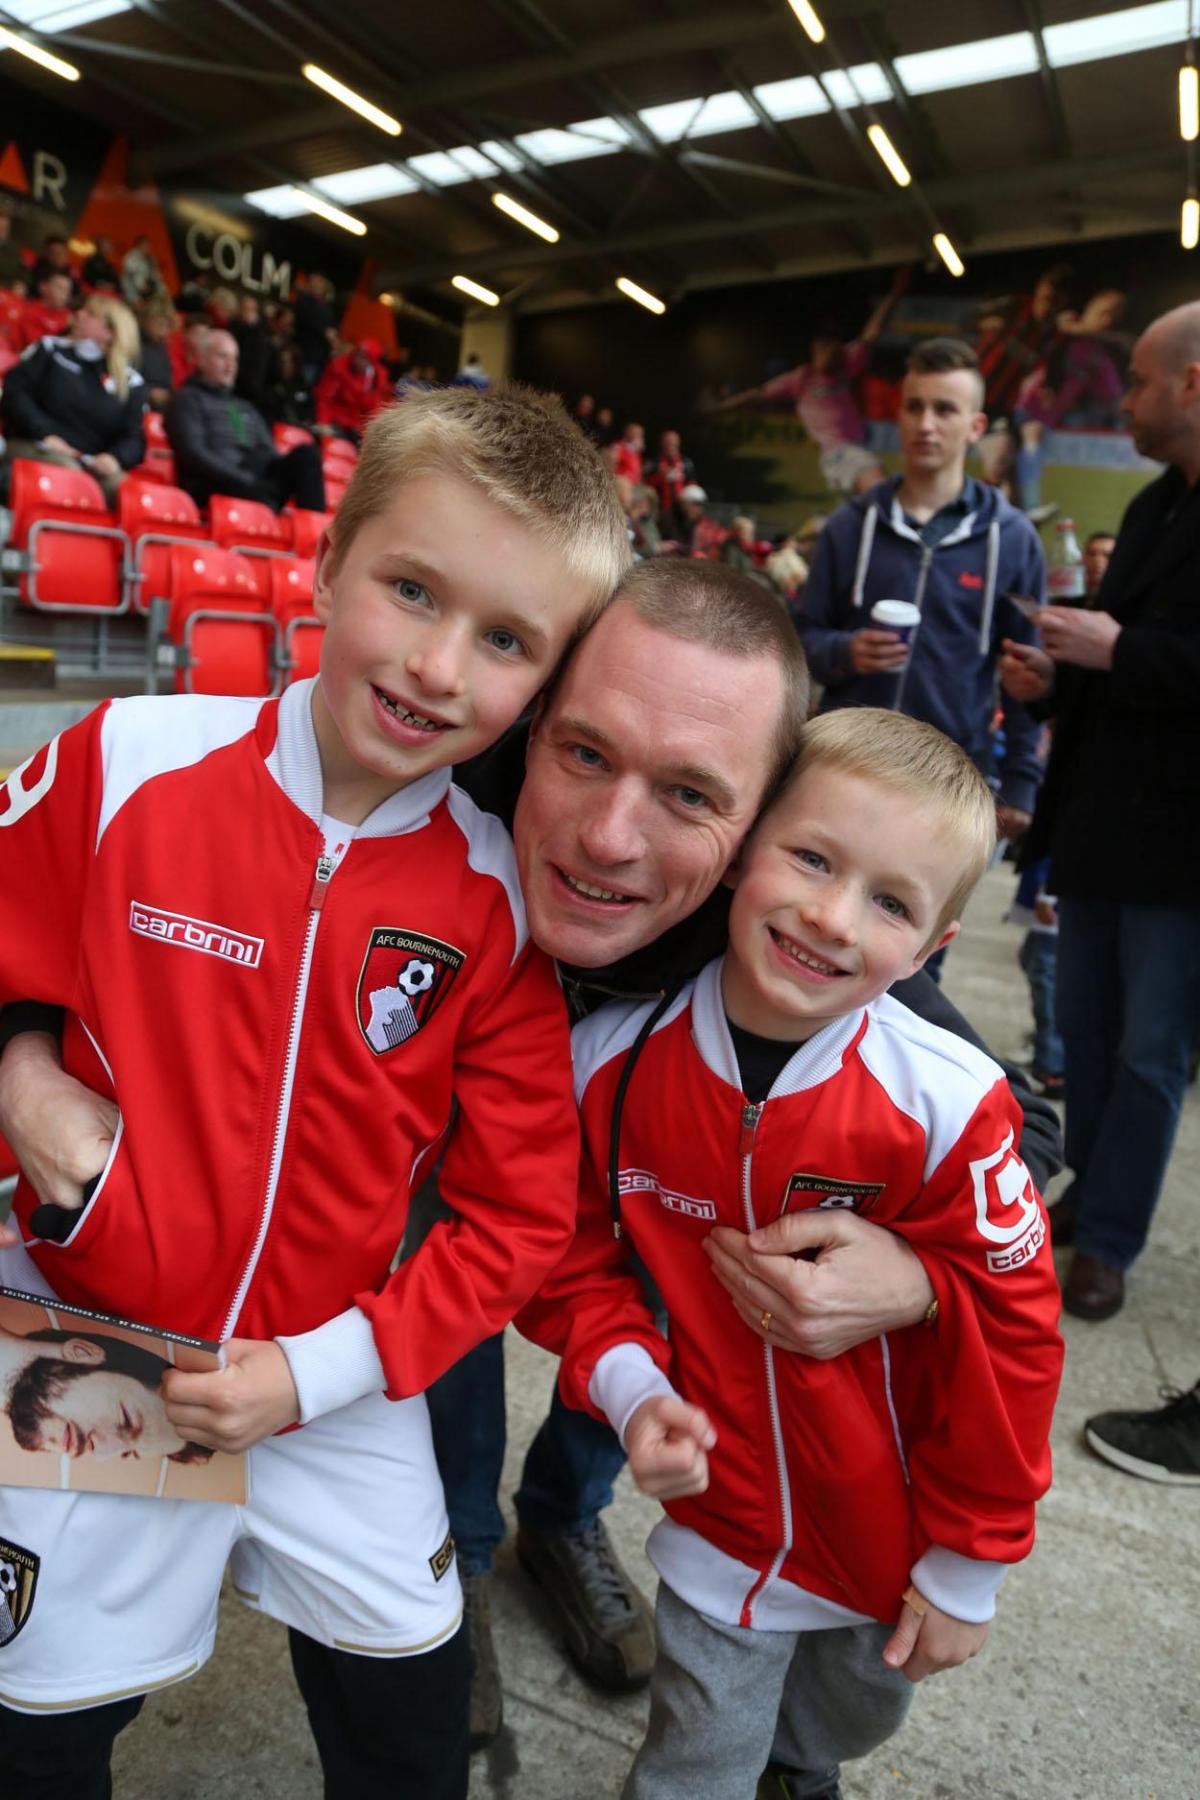 All our pictures from the AFCB v Bolton game at Dean Court